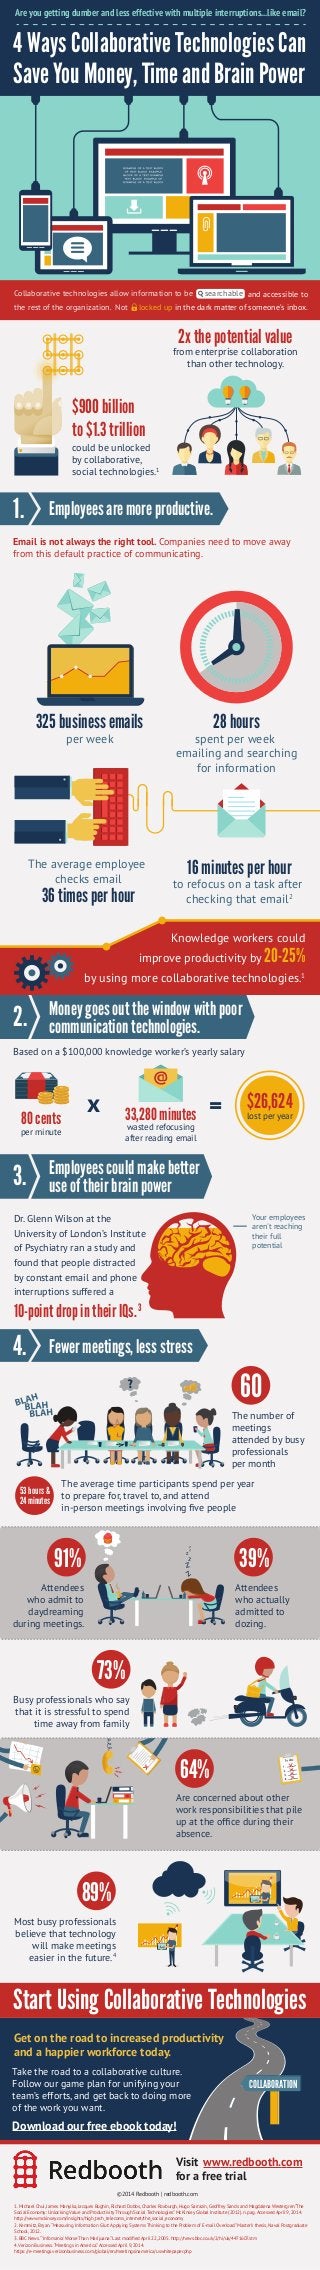 4 Ways Collaborative Technologies Can
Save You Money, Time and Brain Power
Are you getting dumber and less effective with ...